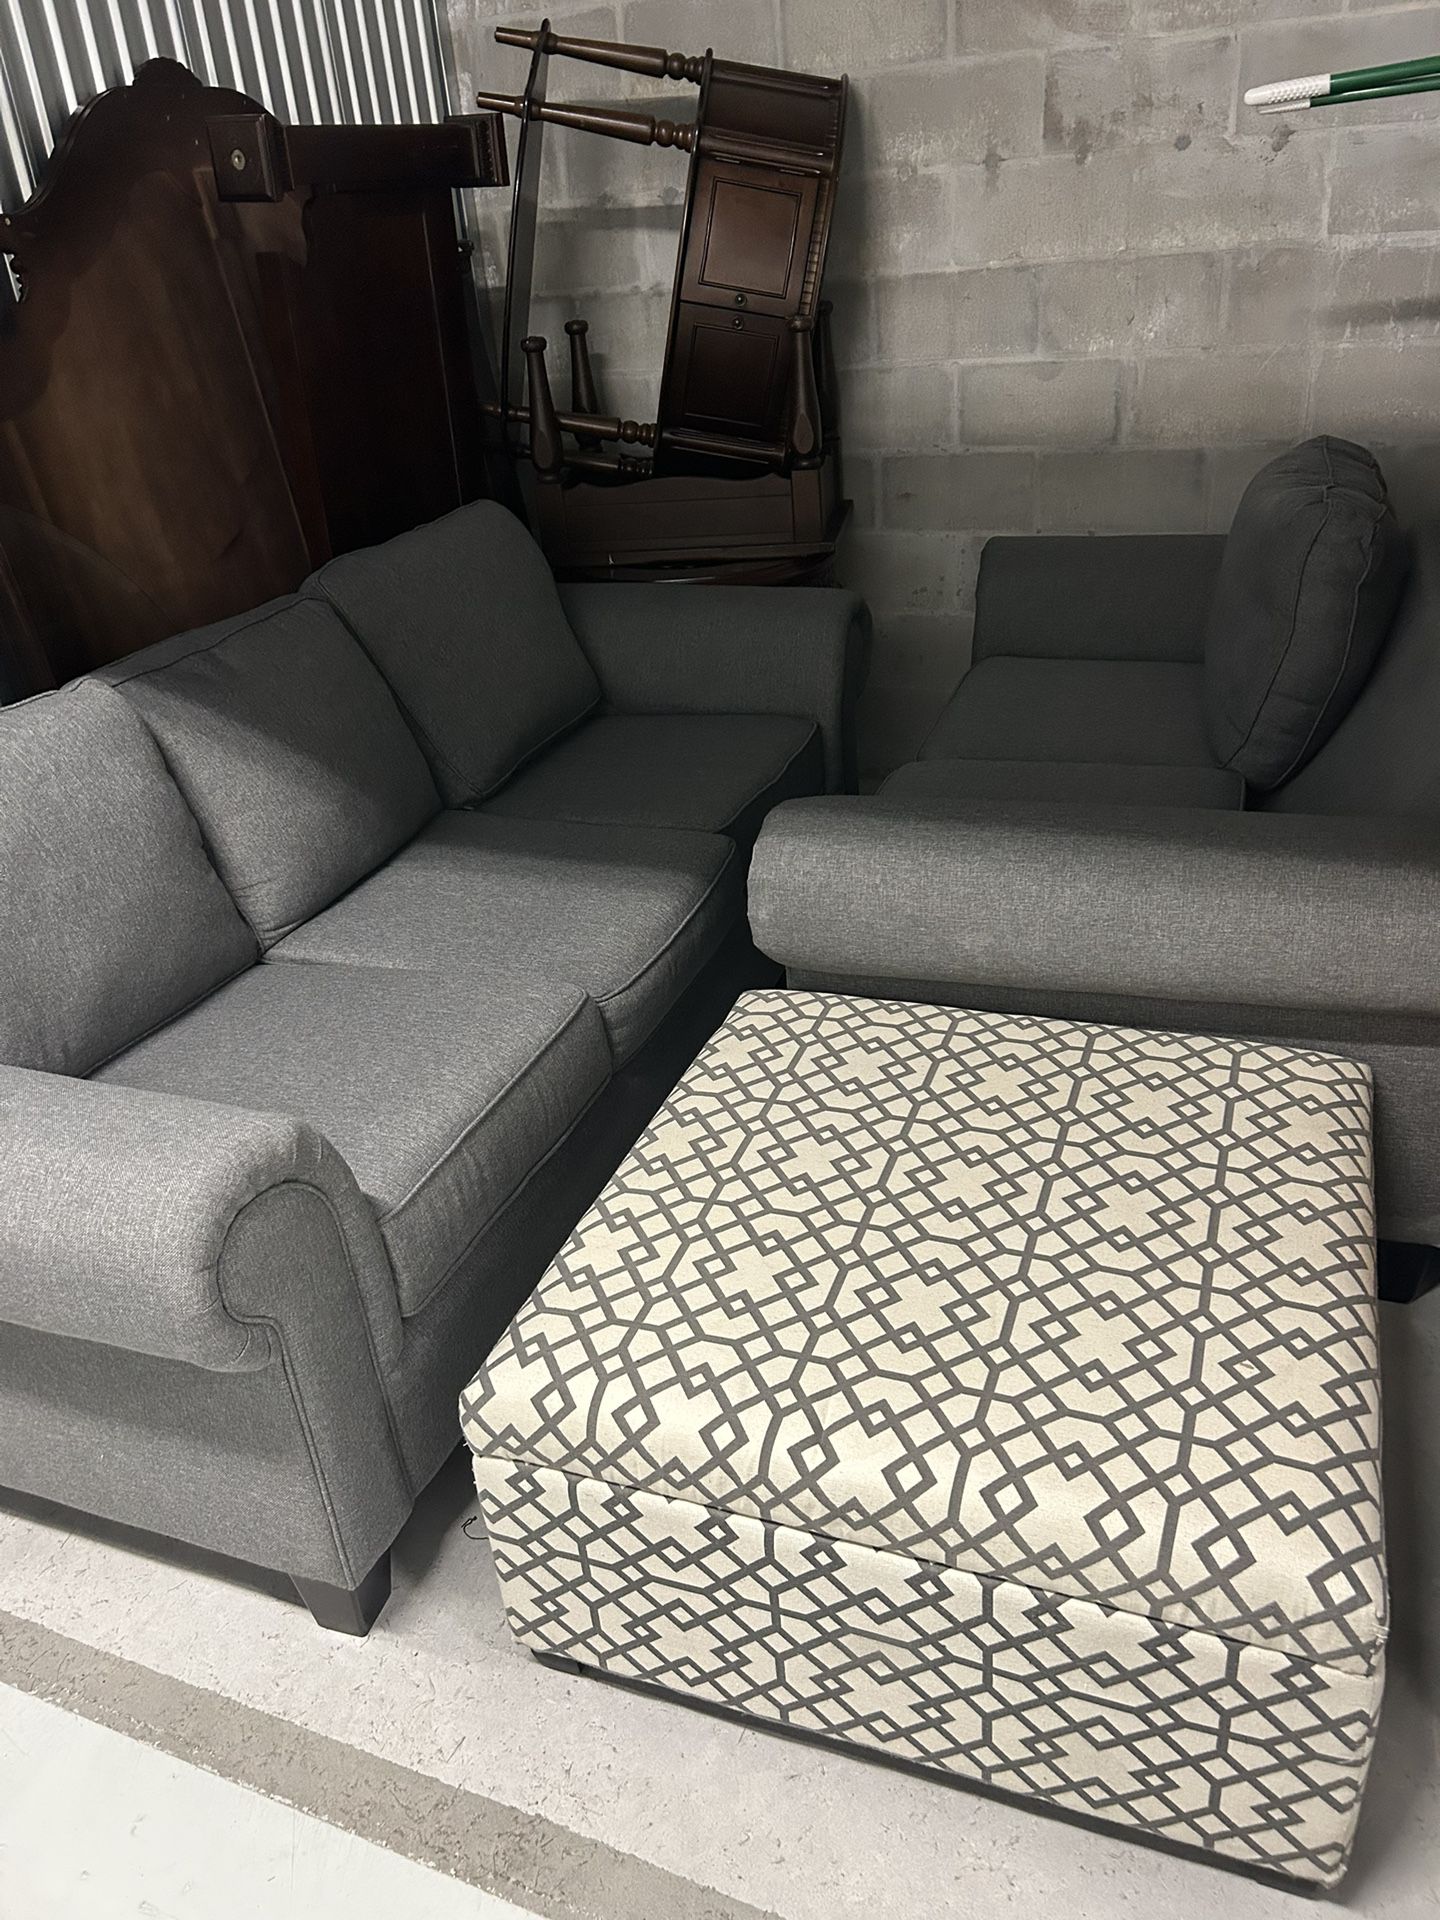 Beautiful Living Room Set for Sale in Orlando, FL - OfferUp